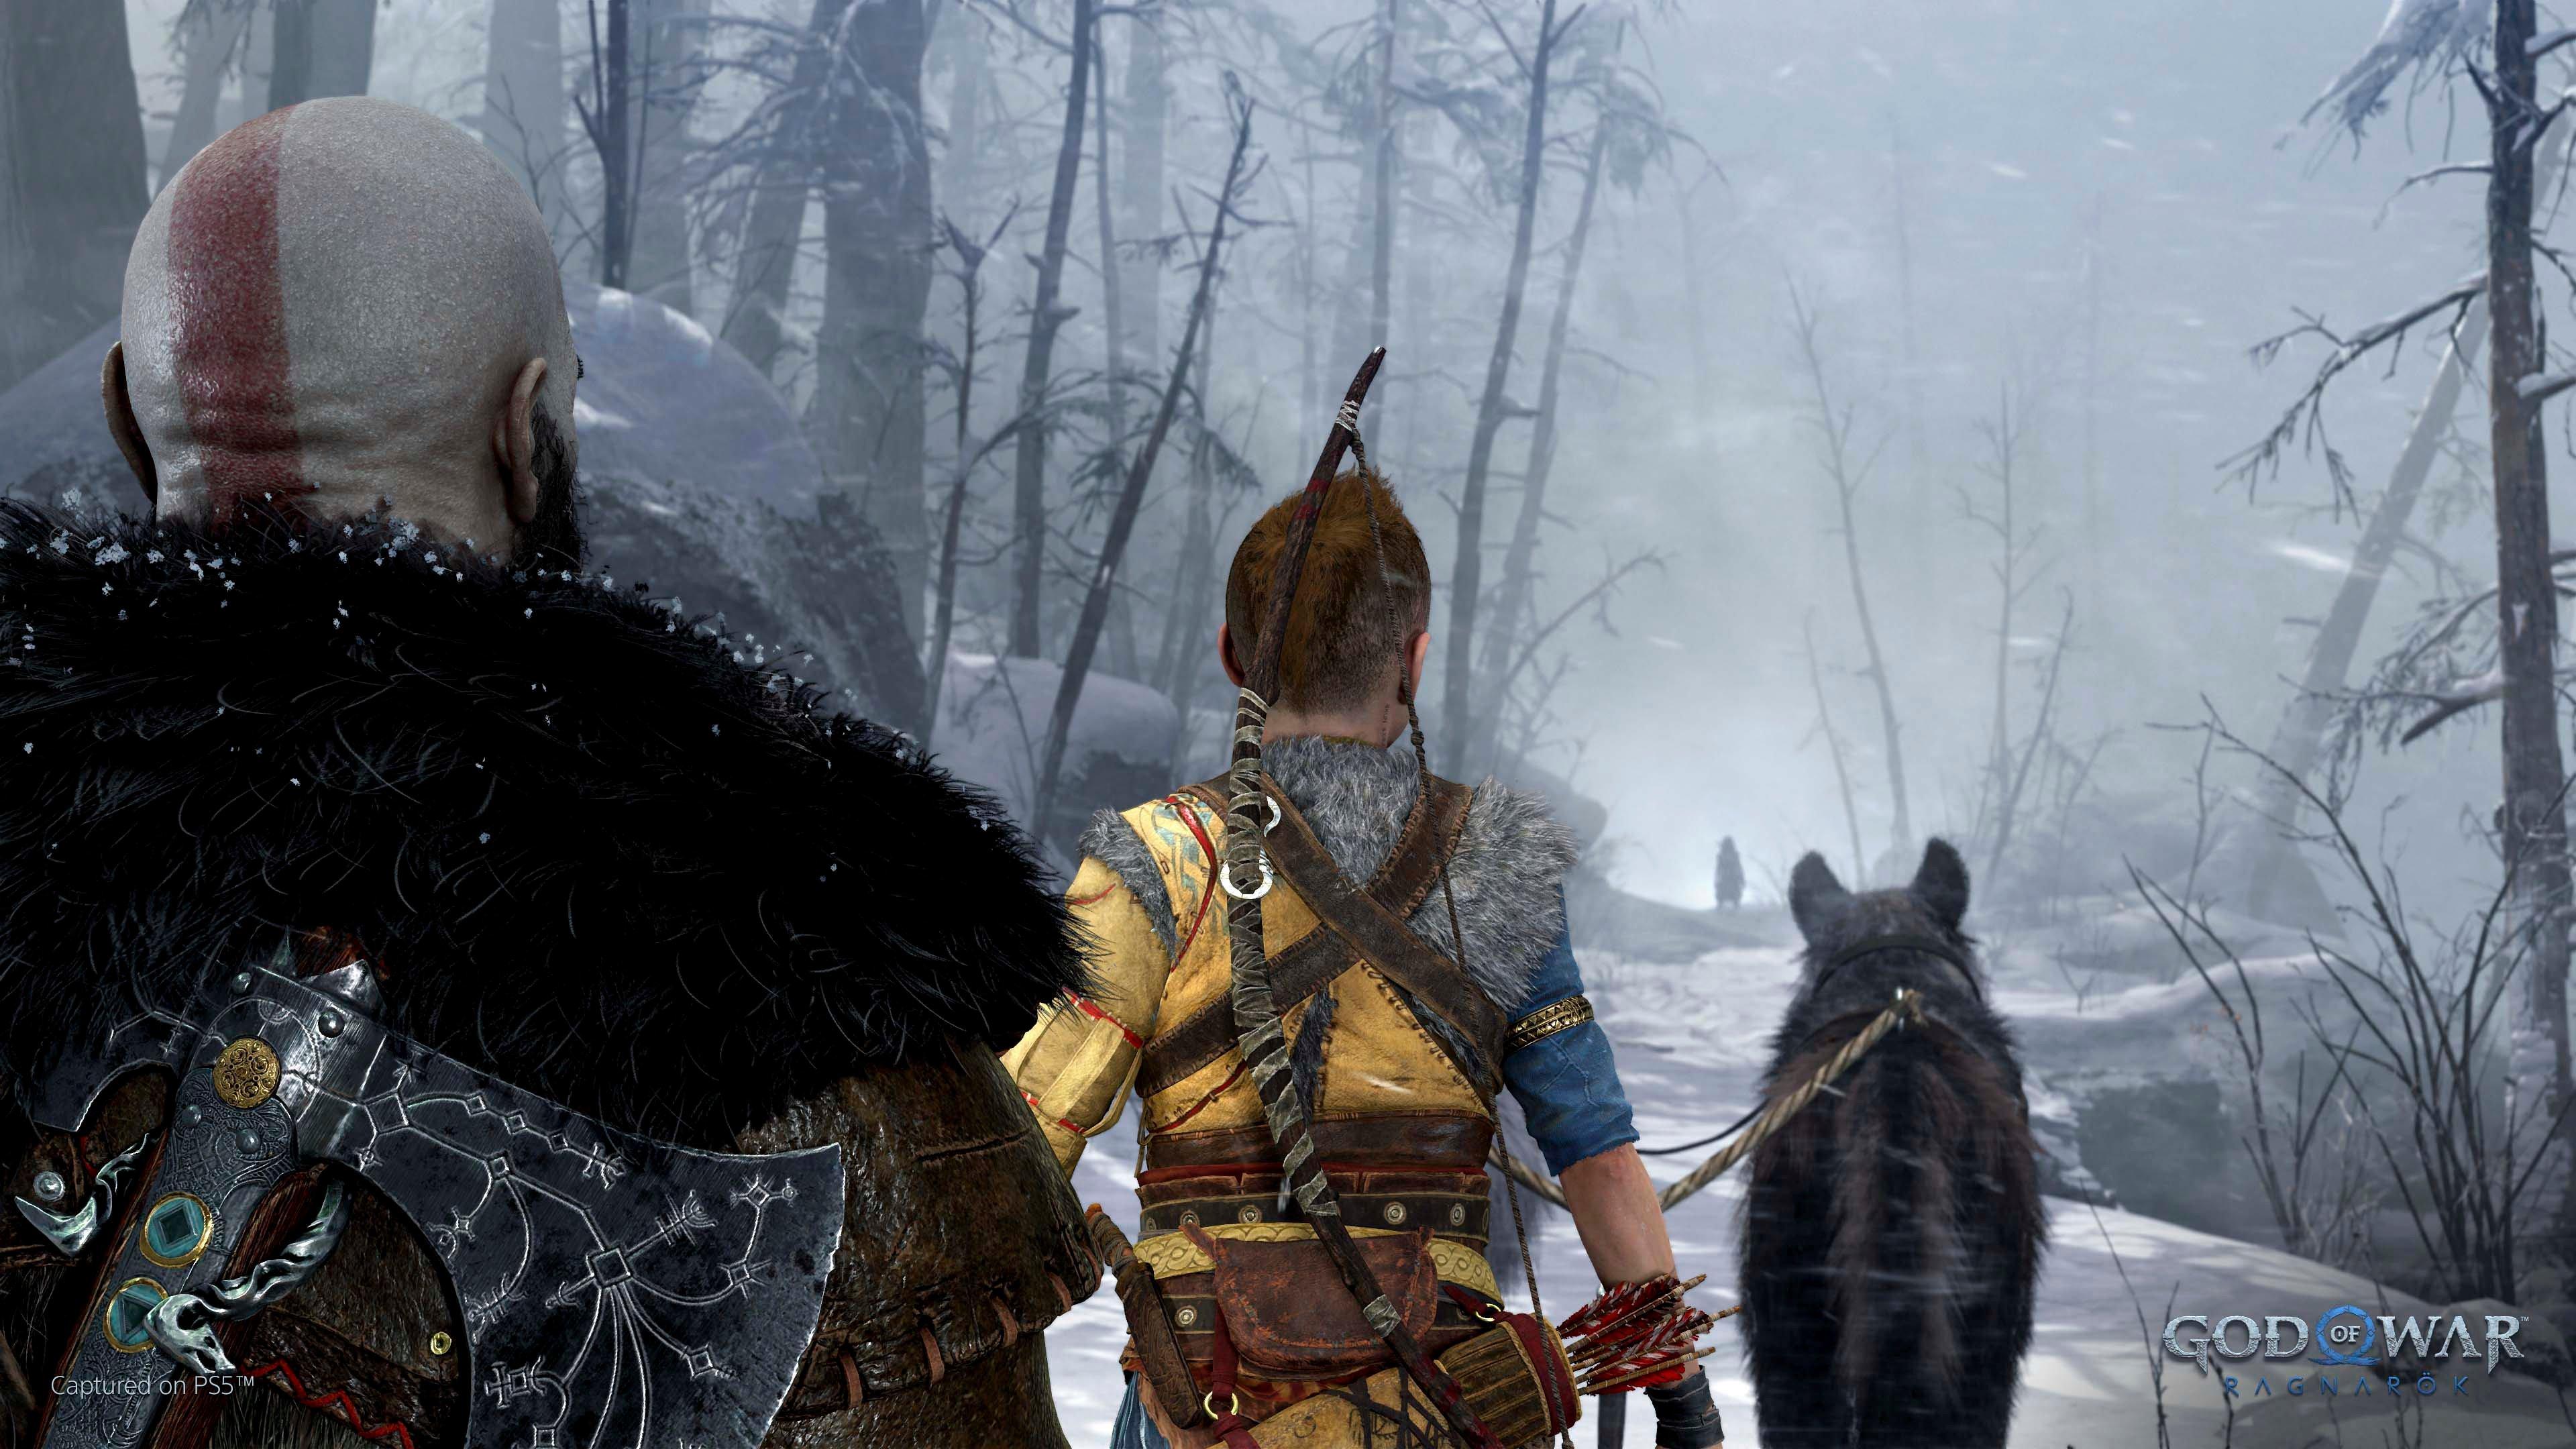 I returned to God of War on PS5 — and it's making the wait for